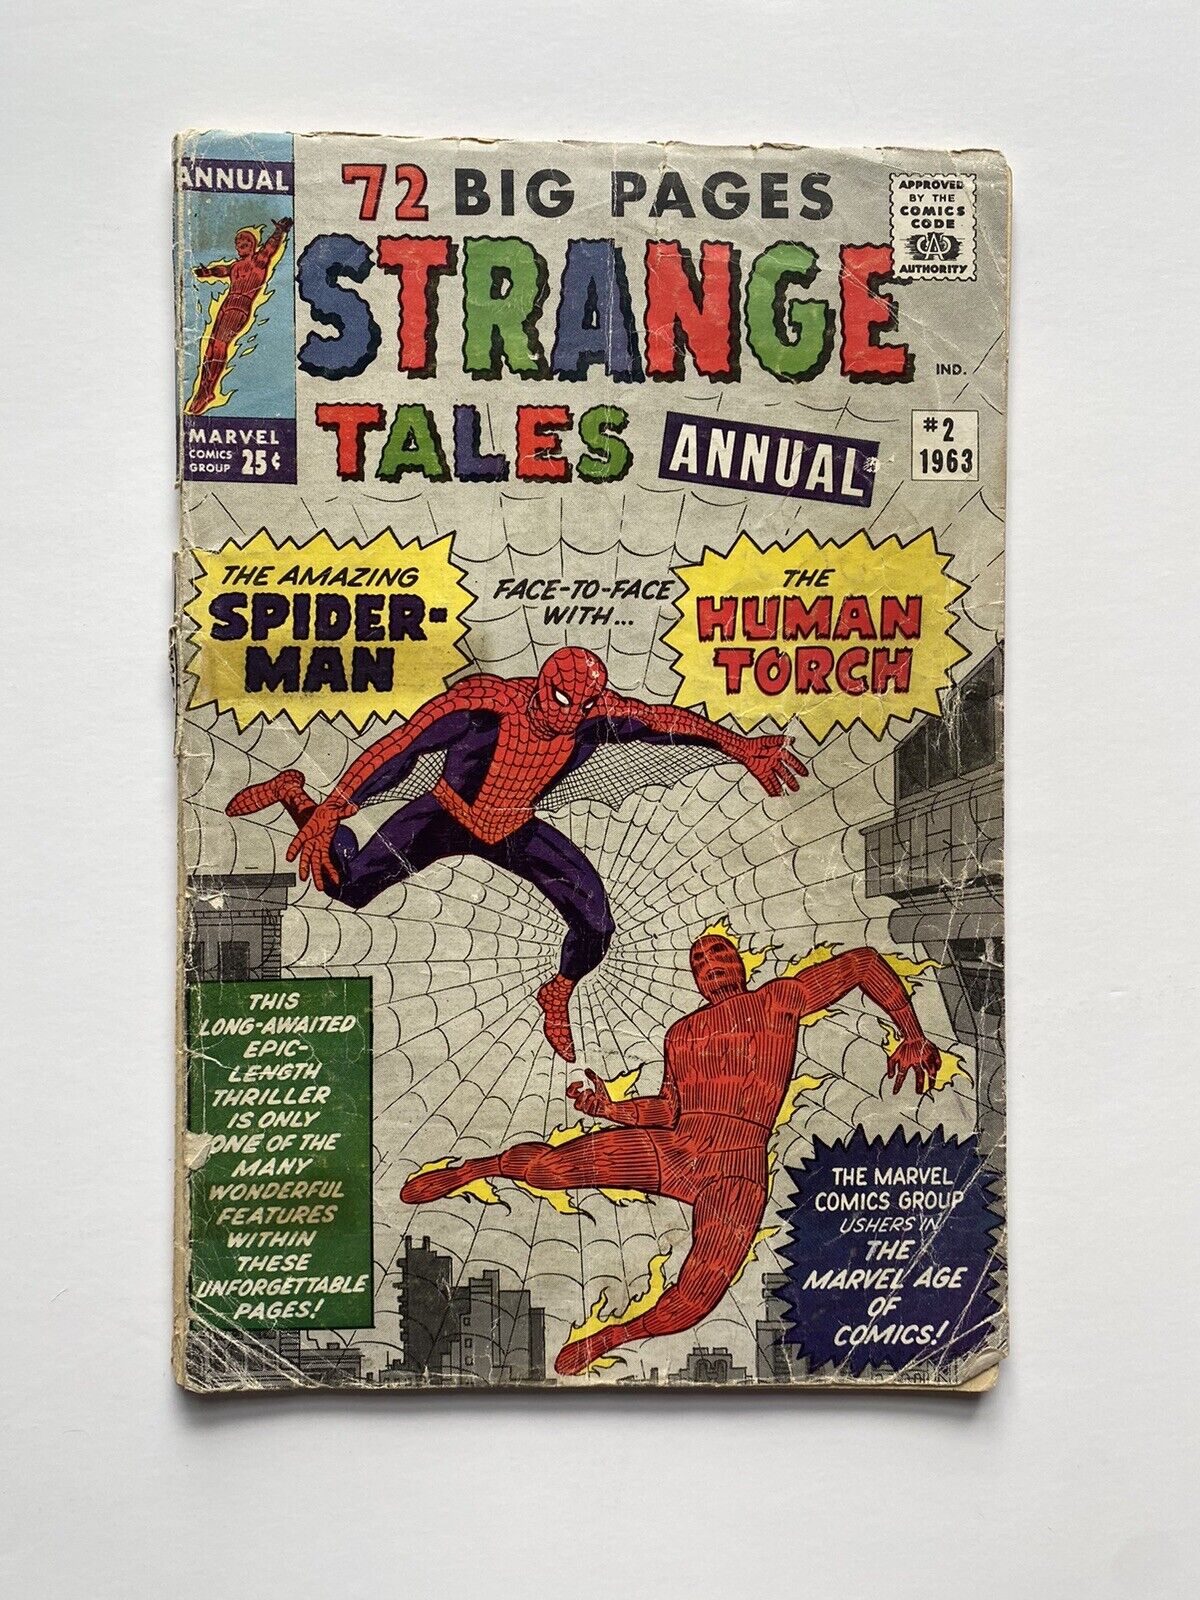 Strange Tales Annual #2 Early Spiderman, Detached Cover, No Back Cover or Page 1